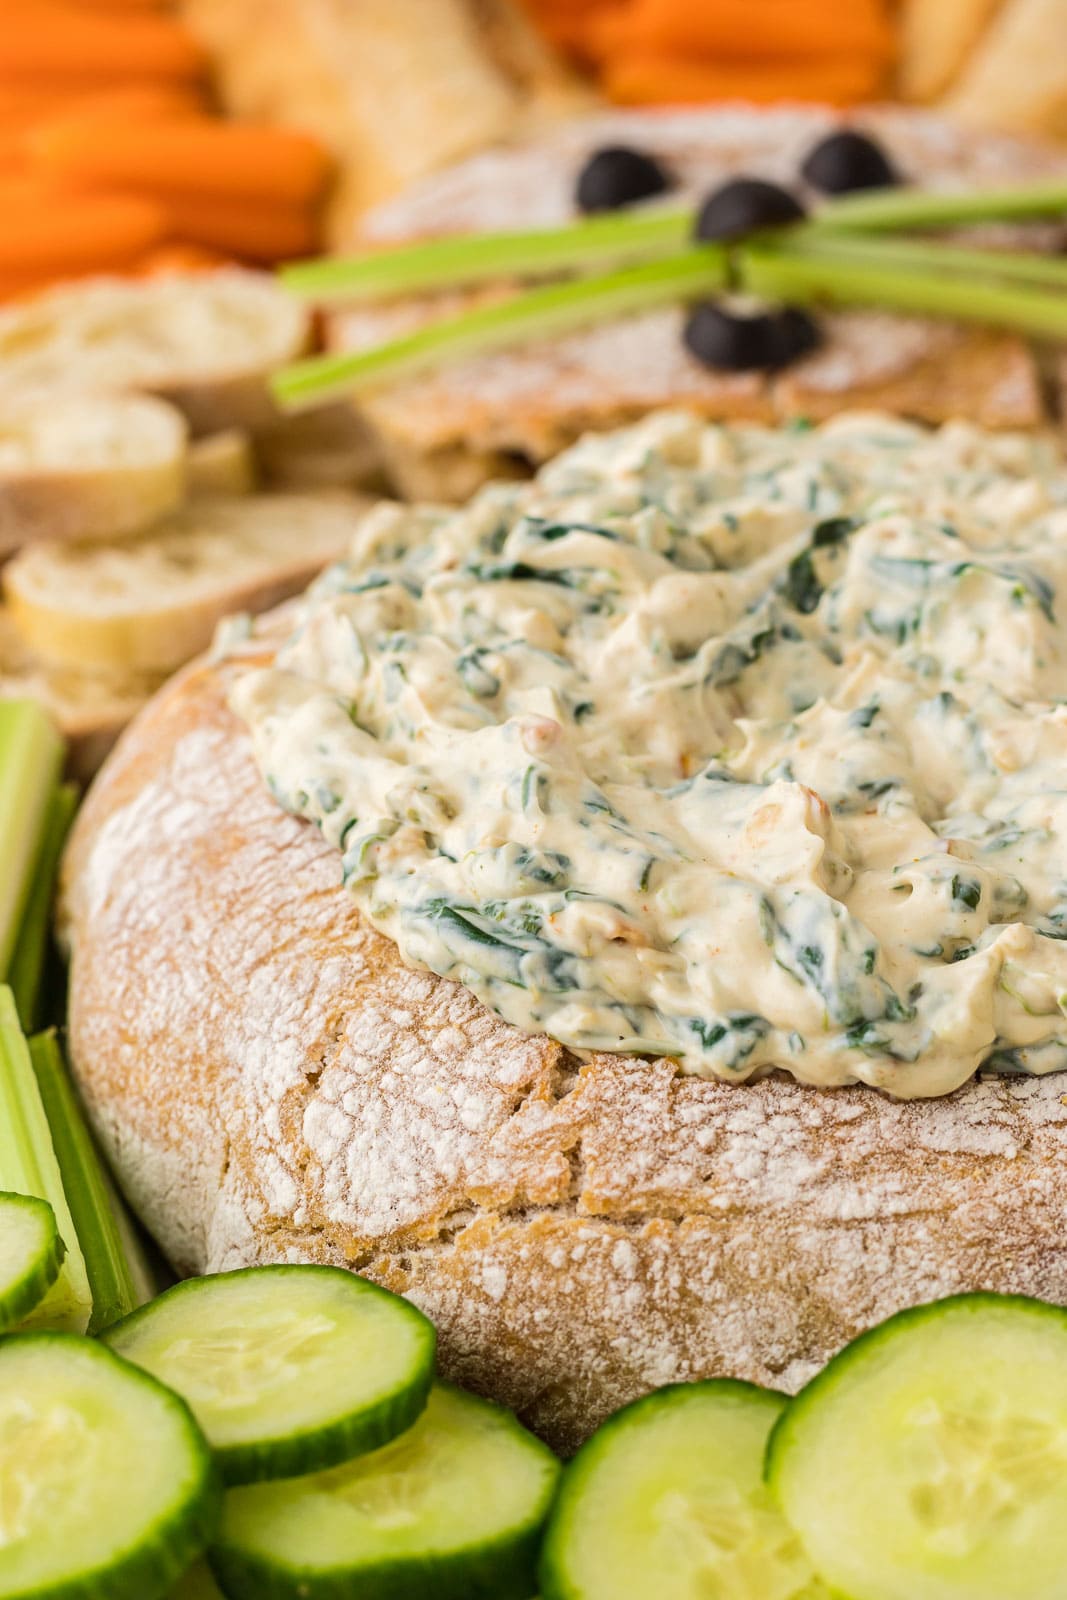 Spinach dip in bread bowl.